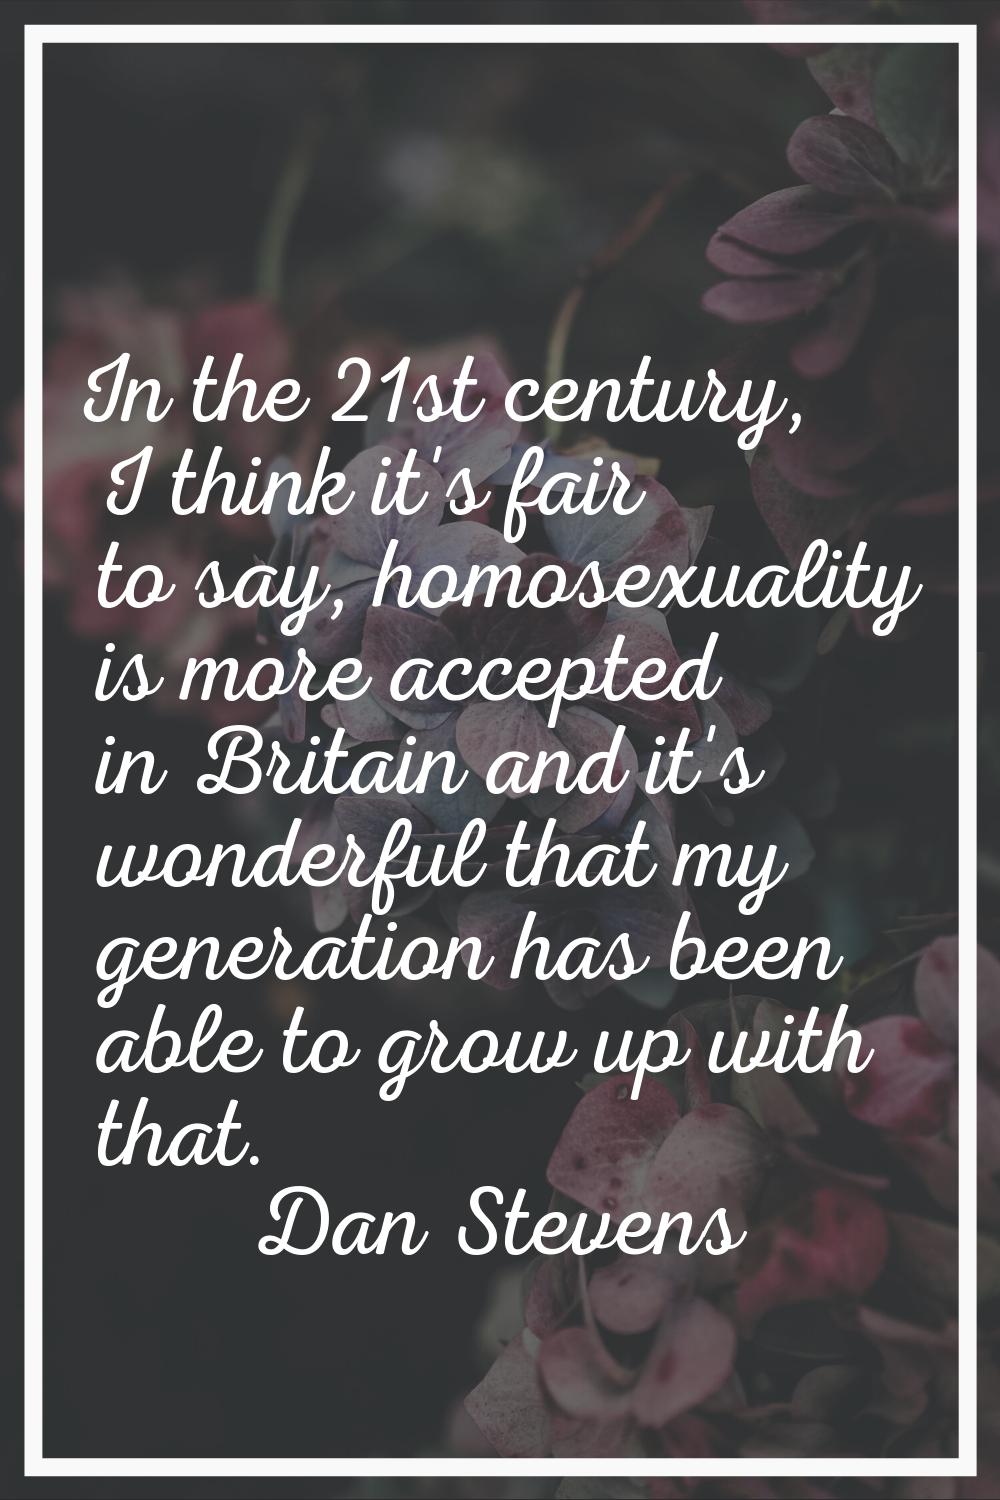 In the 21st century, I think it's fair to say, homosexuality is more accepted in Britain and it's w